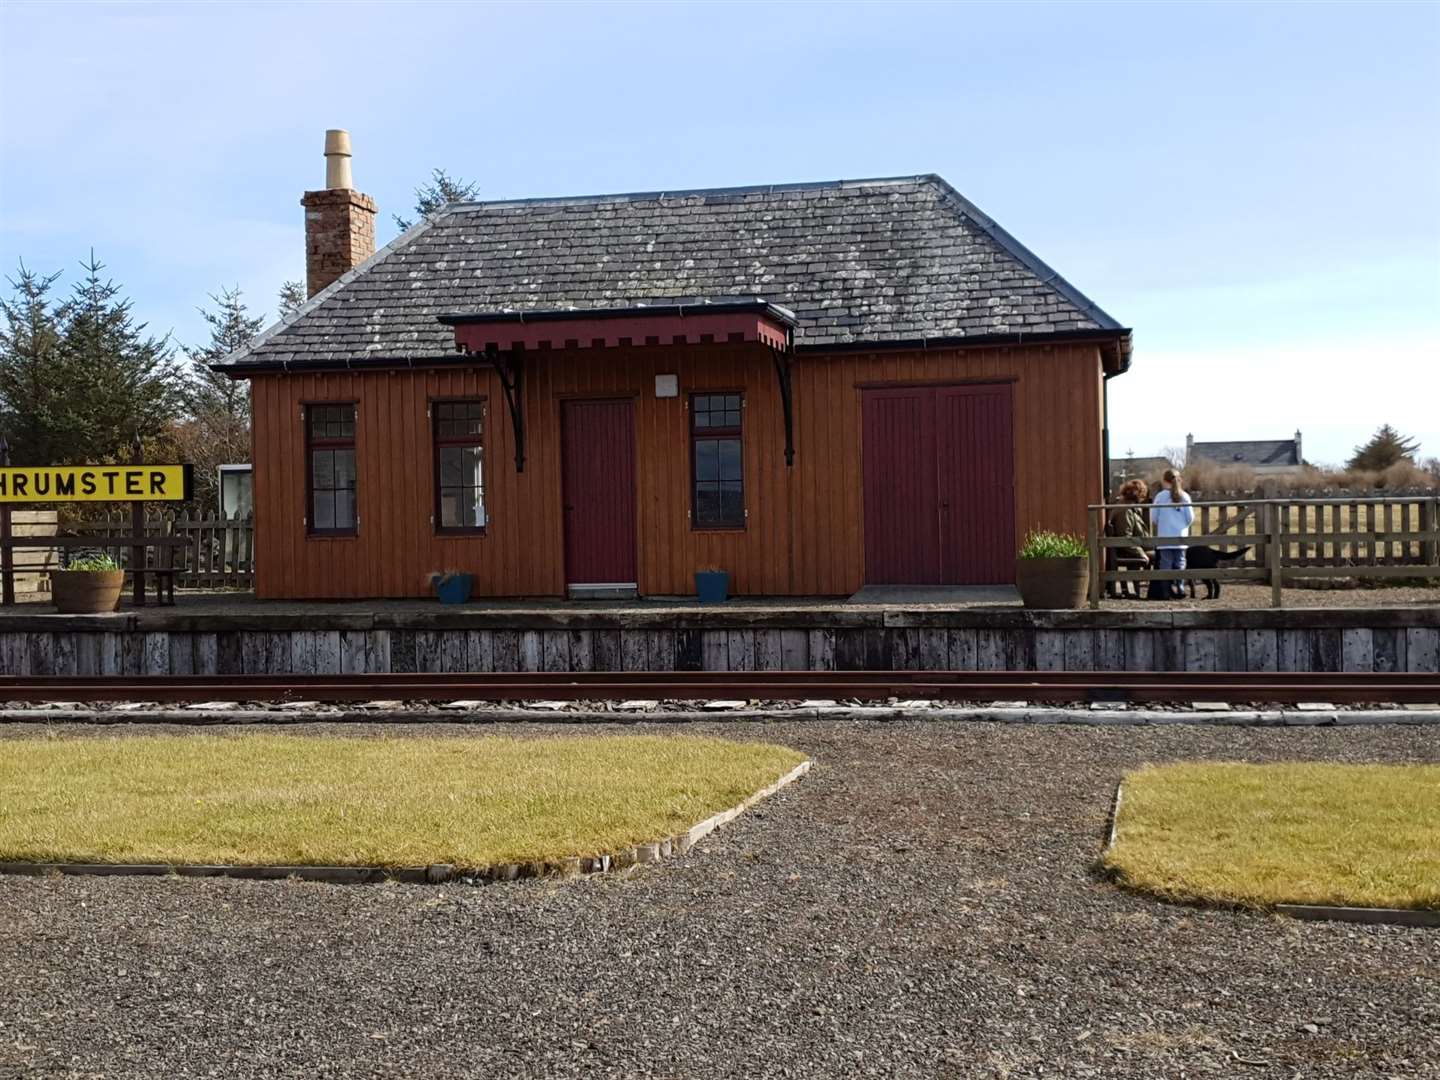 The old station at Thrumster was part of the Wick and Lybster Light Railway.